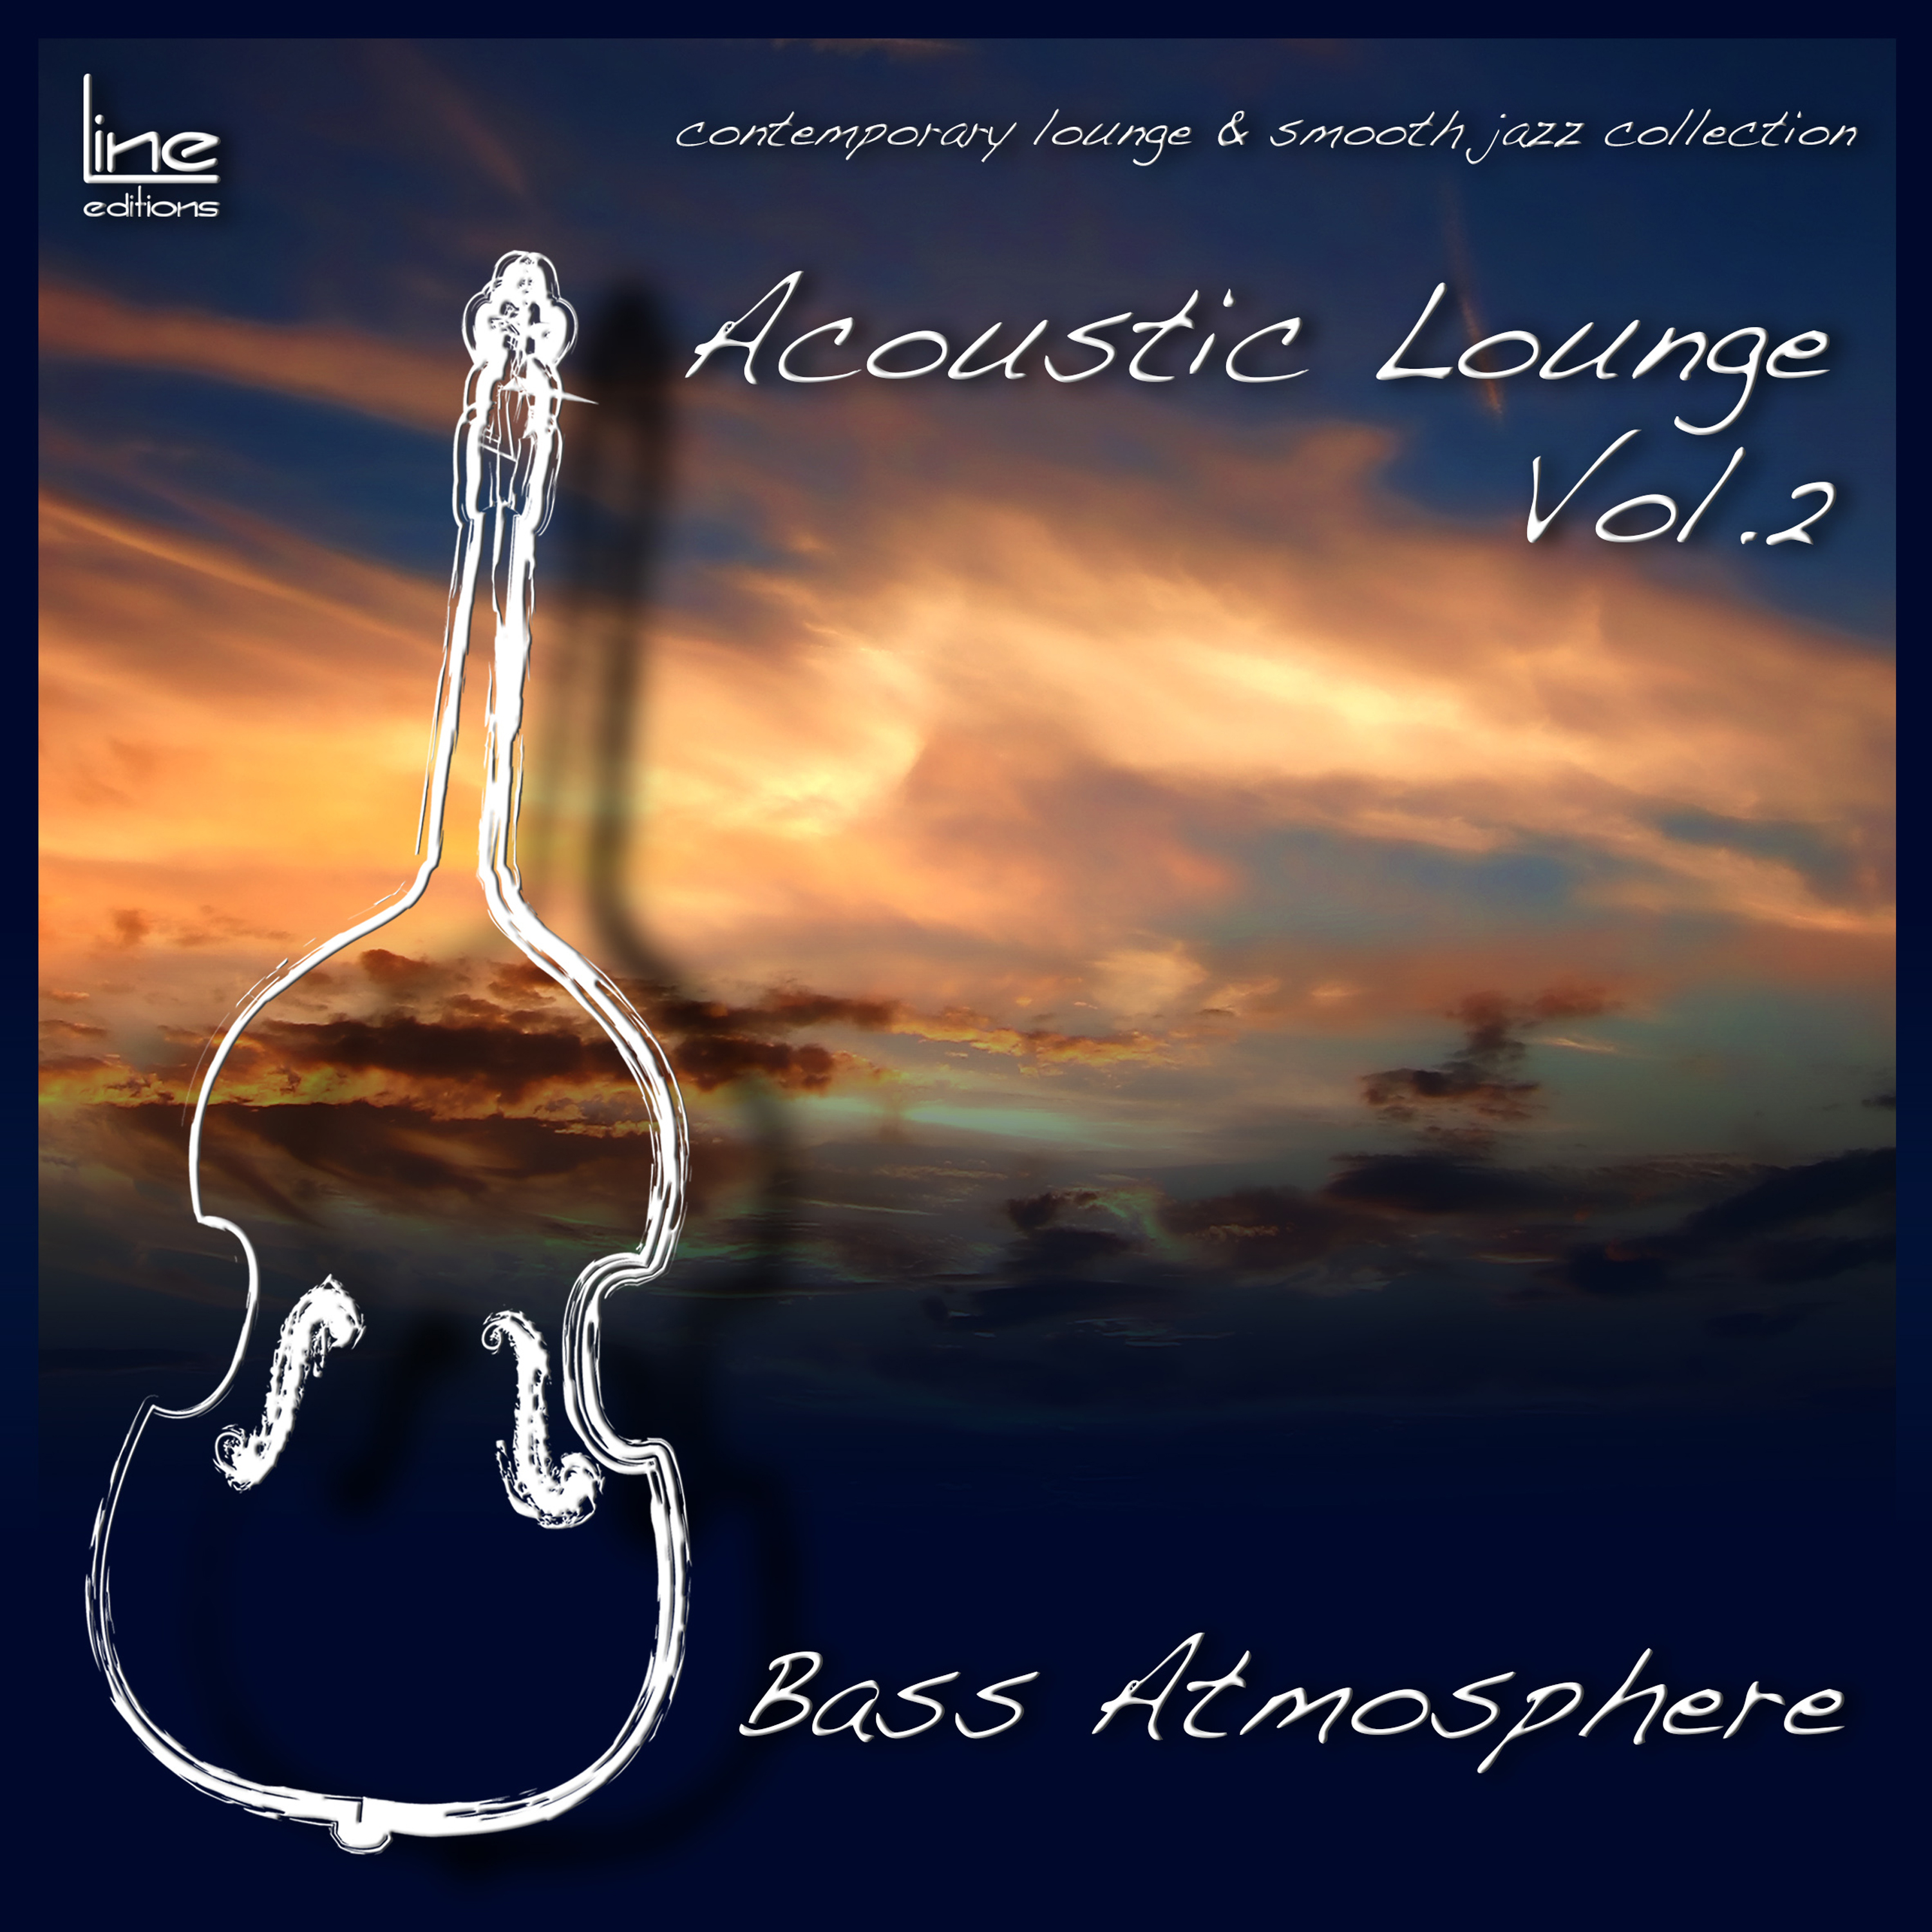 Acoustic Lounge, Vol. 2 Bass Atmosfere (Contemporary Lounge & Smooth Jazz Collection)